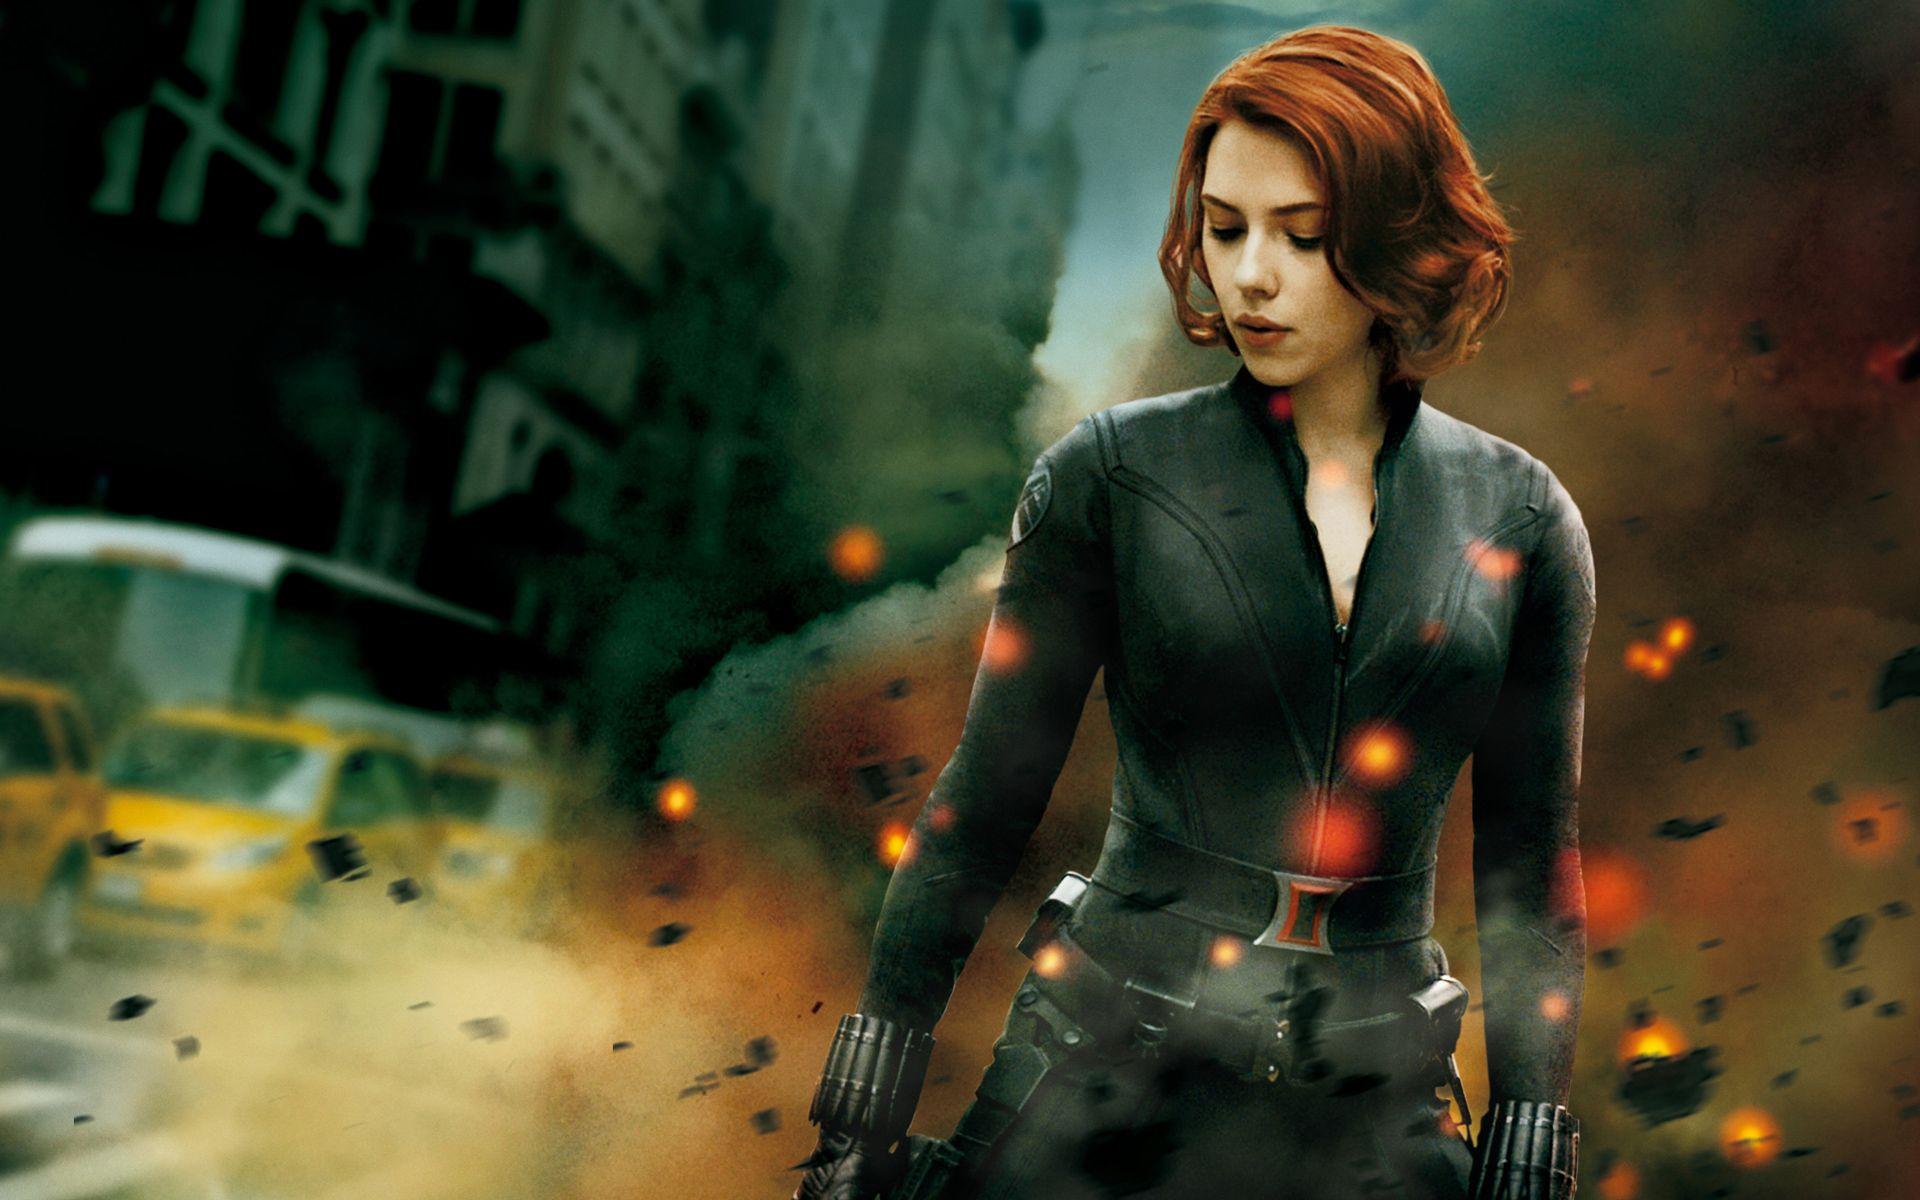 Black Widow, Love Interest for Steve Rogers to Appear in Captain